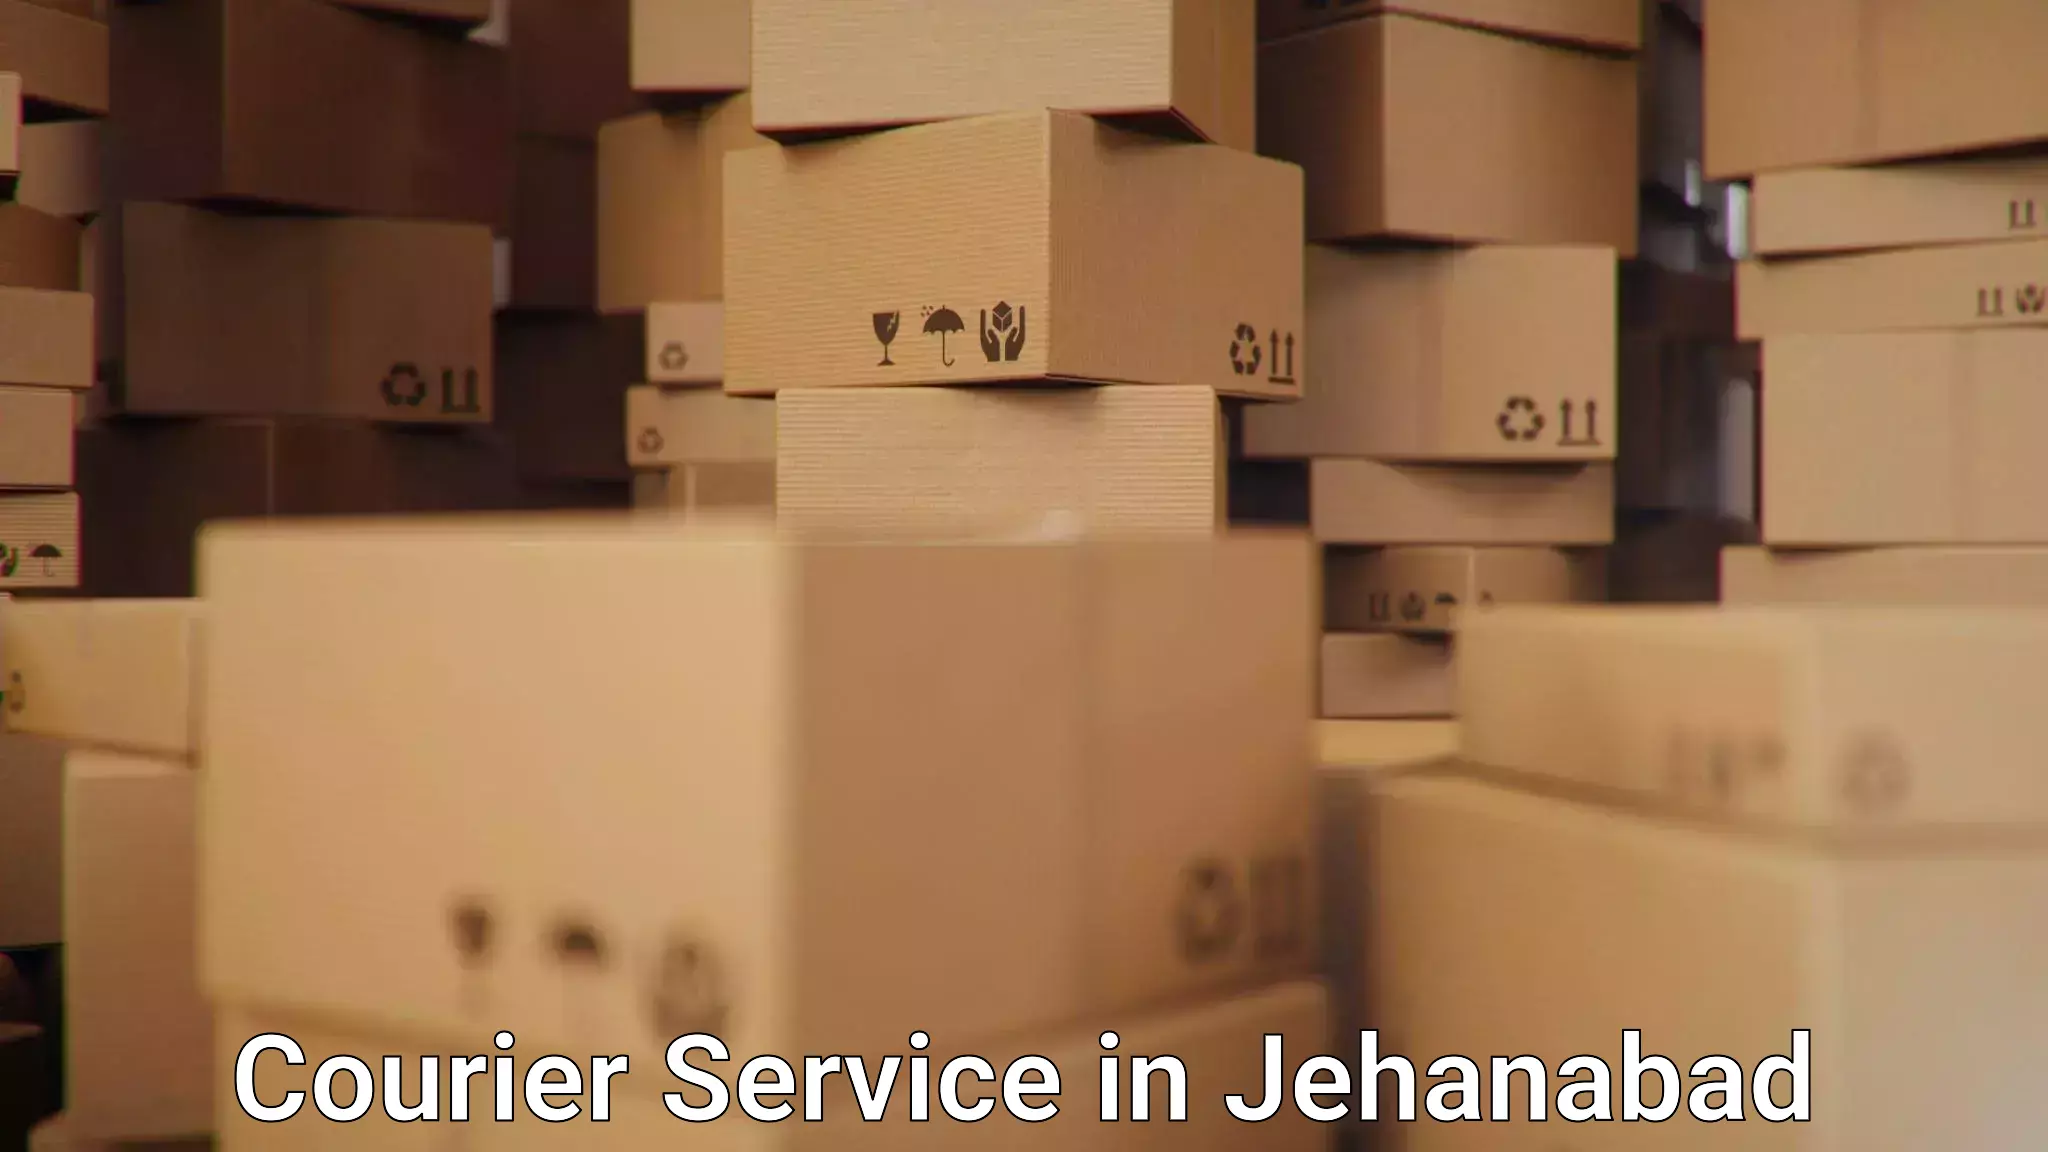 Sustainable courier practices in Jehanabad